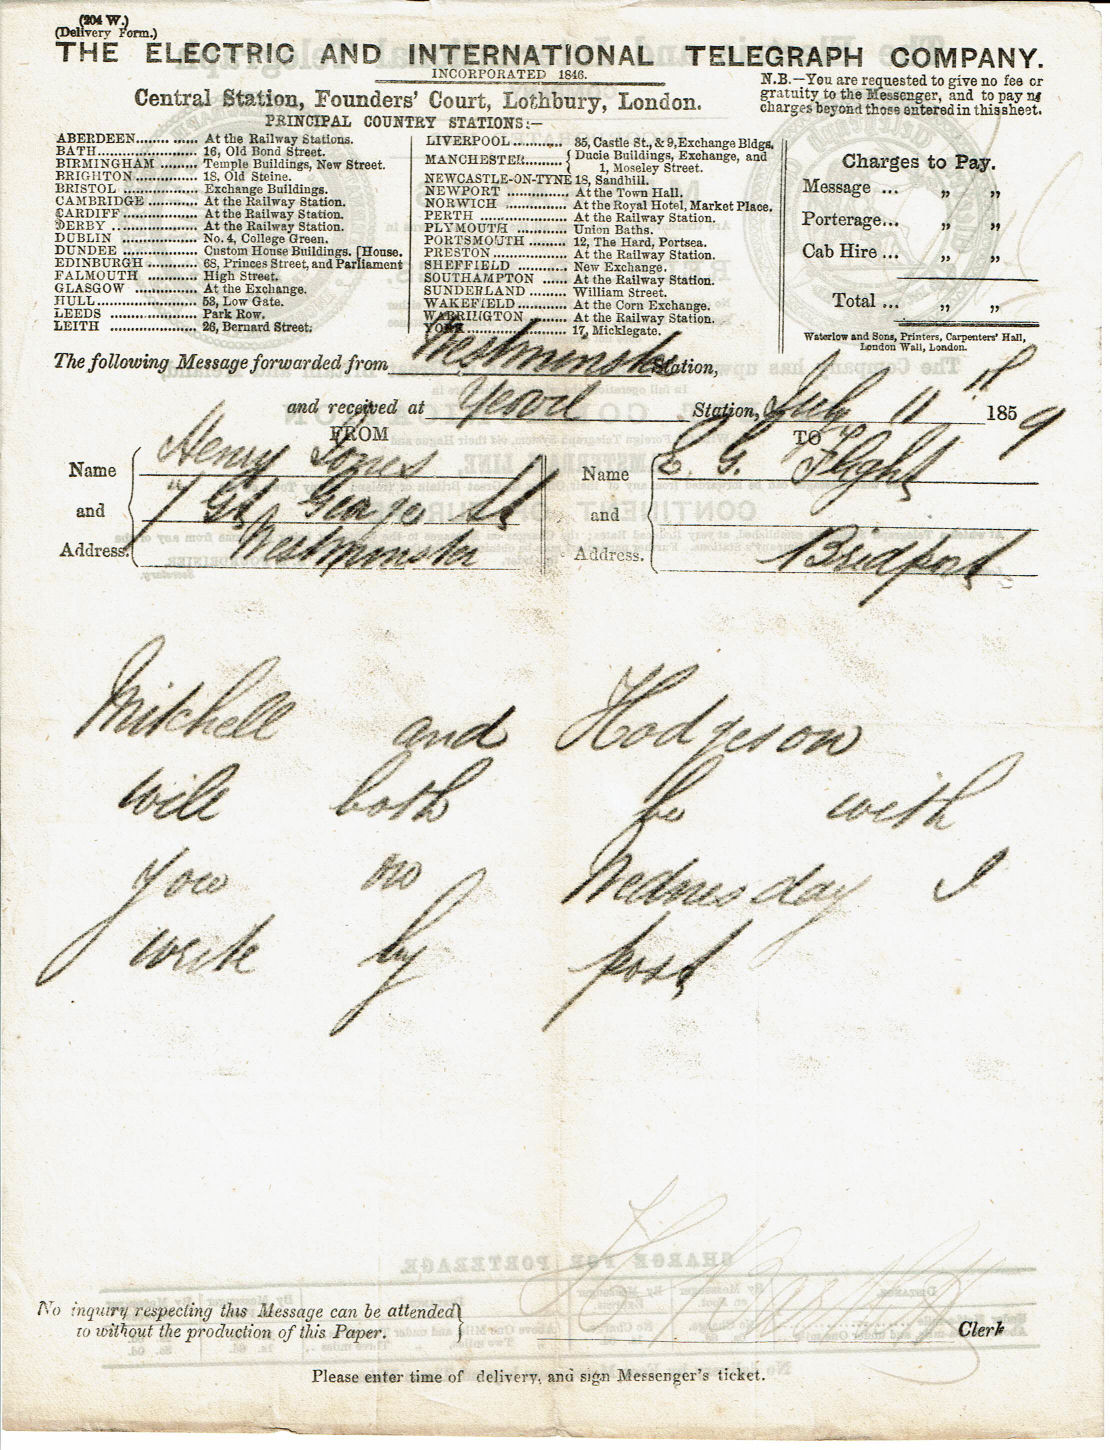 Electric Telegraph Company Stationery 1859 - front.